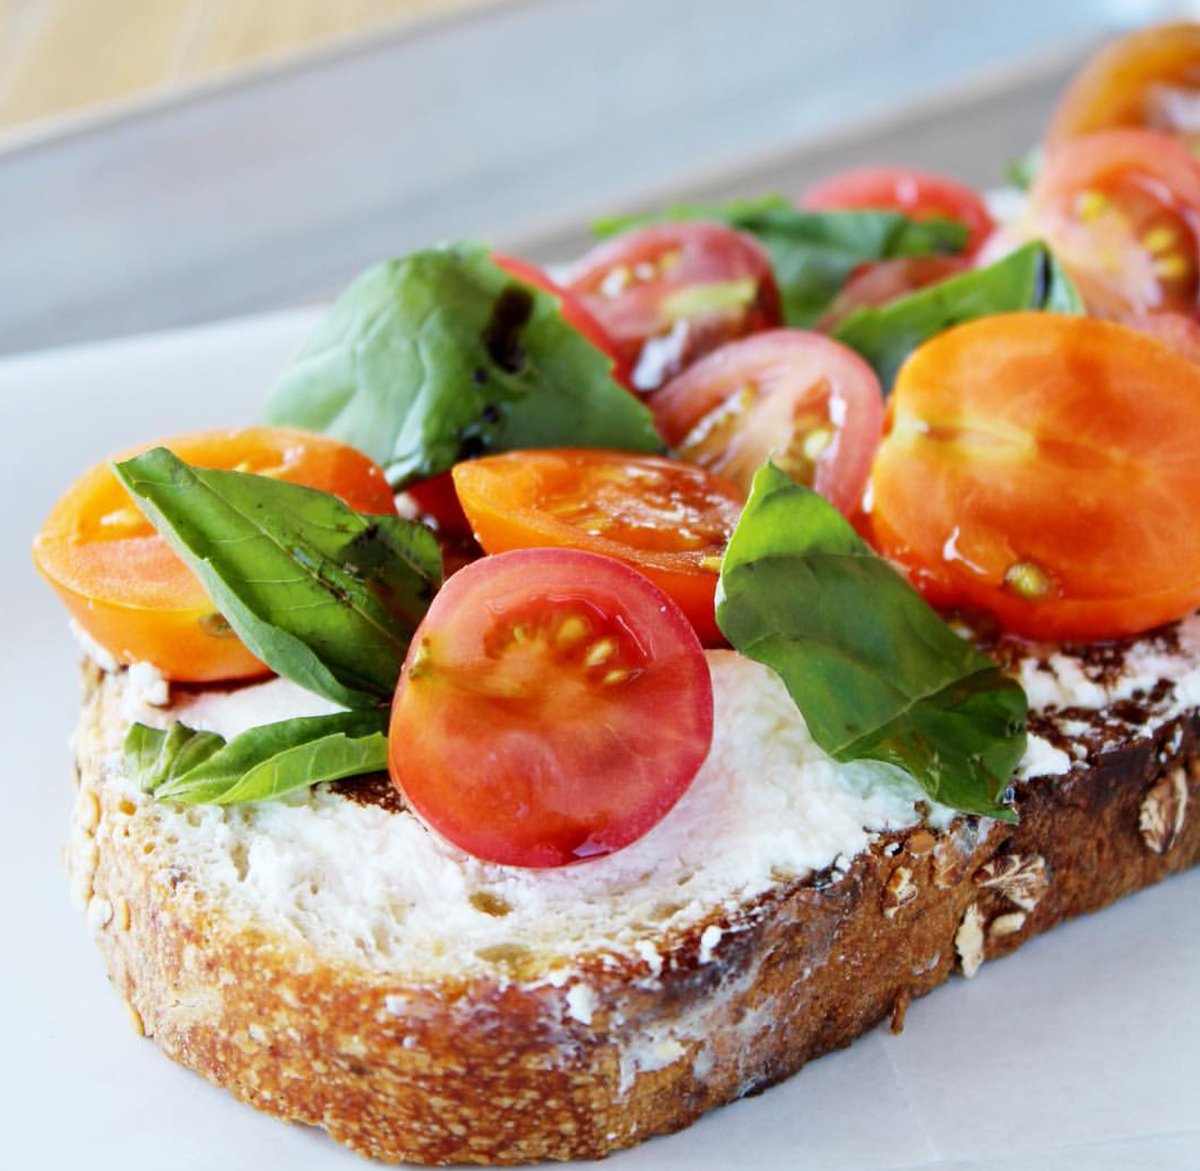 Lunching with one of Dale's Fancy Toasts from Clare's today because when ISN'T anything involving tomatoes, basil, and ricotta the right thing to do?